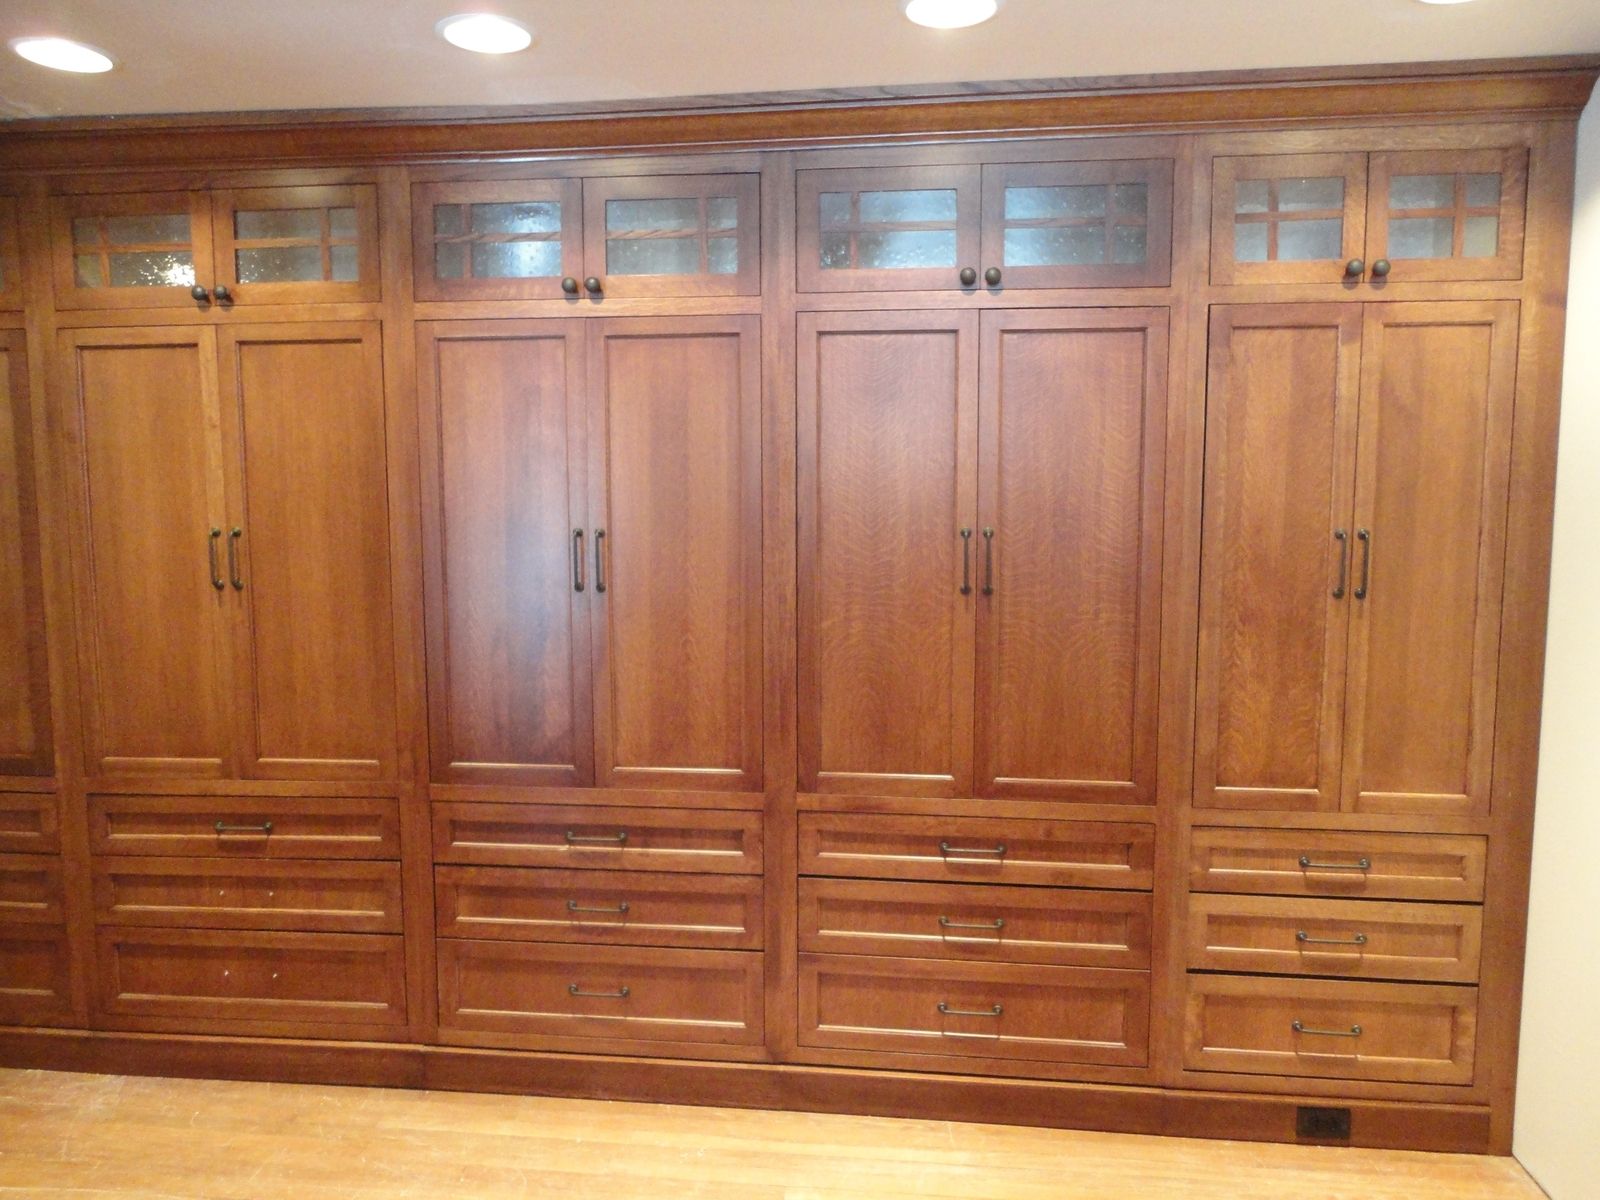 Wardrobe Closet Cabinet Throughout Solid Wood Built In Wardrobes (View 14 of 15)